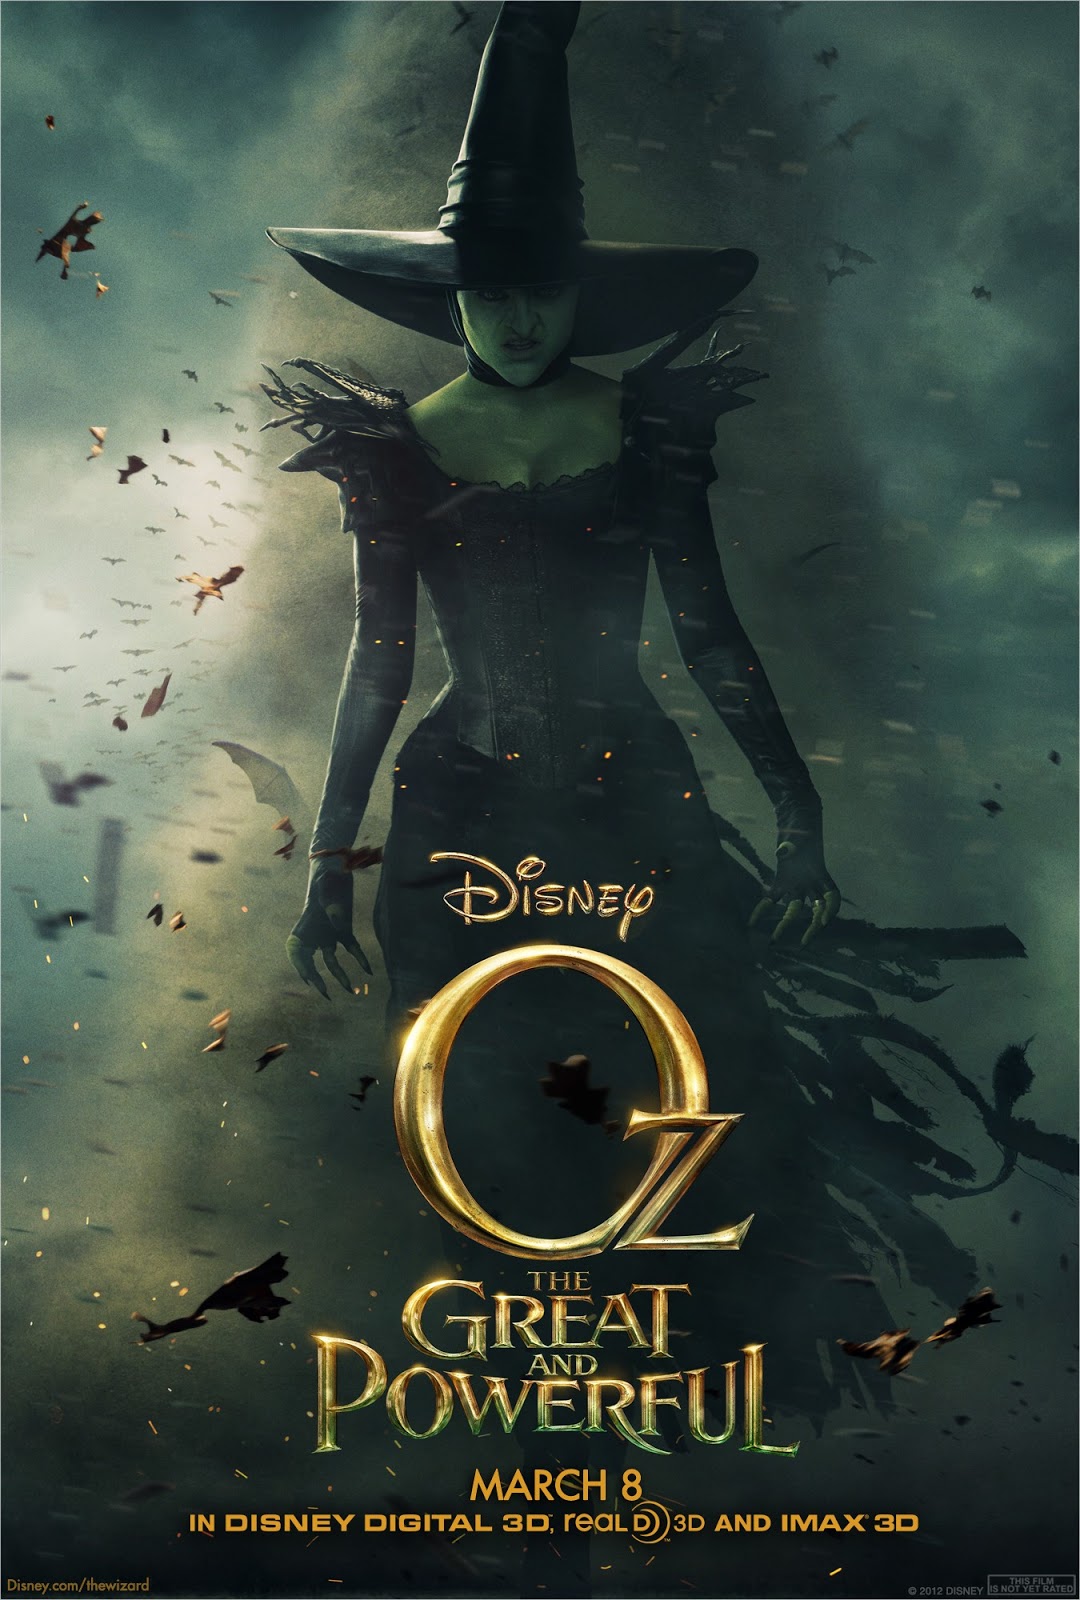 http://4.bp.blogspot.com/-ord2_NA1v0Y/UNHJGjT7eoI/AAAAAAAAQ9o/AkH_GMMF3Zs/s1600/oz_the_great_and_powerful_ver7_xxlg.jpg